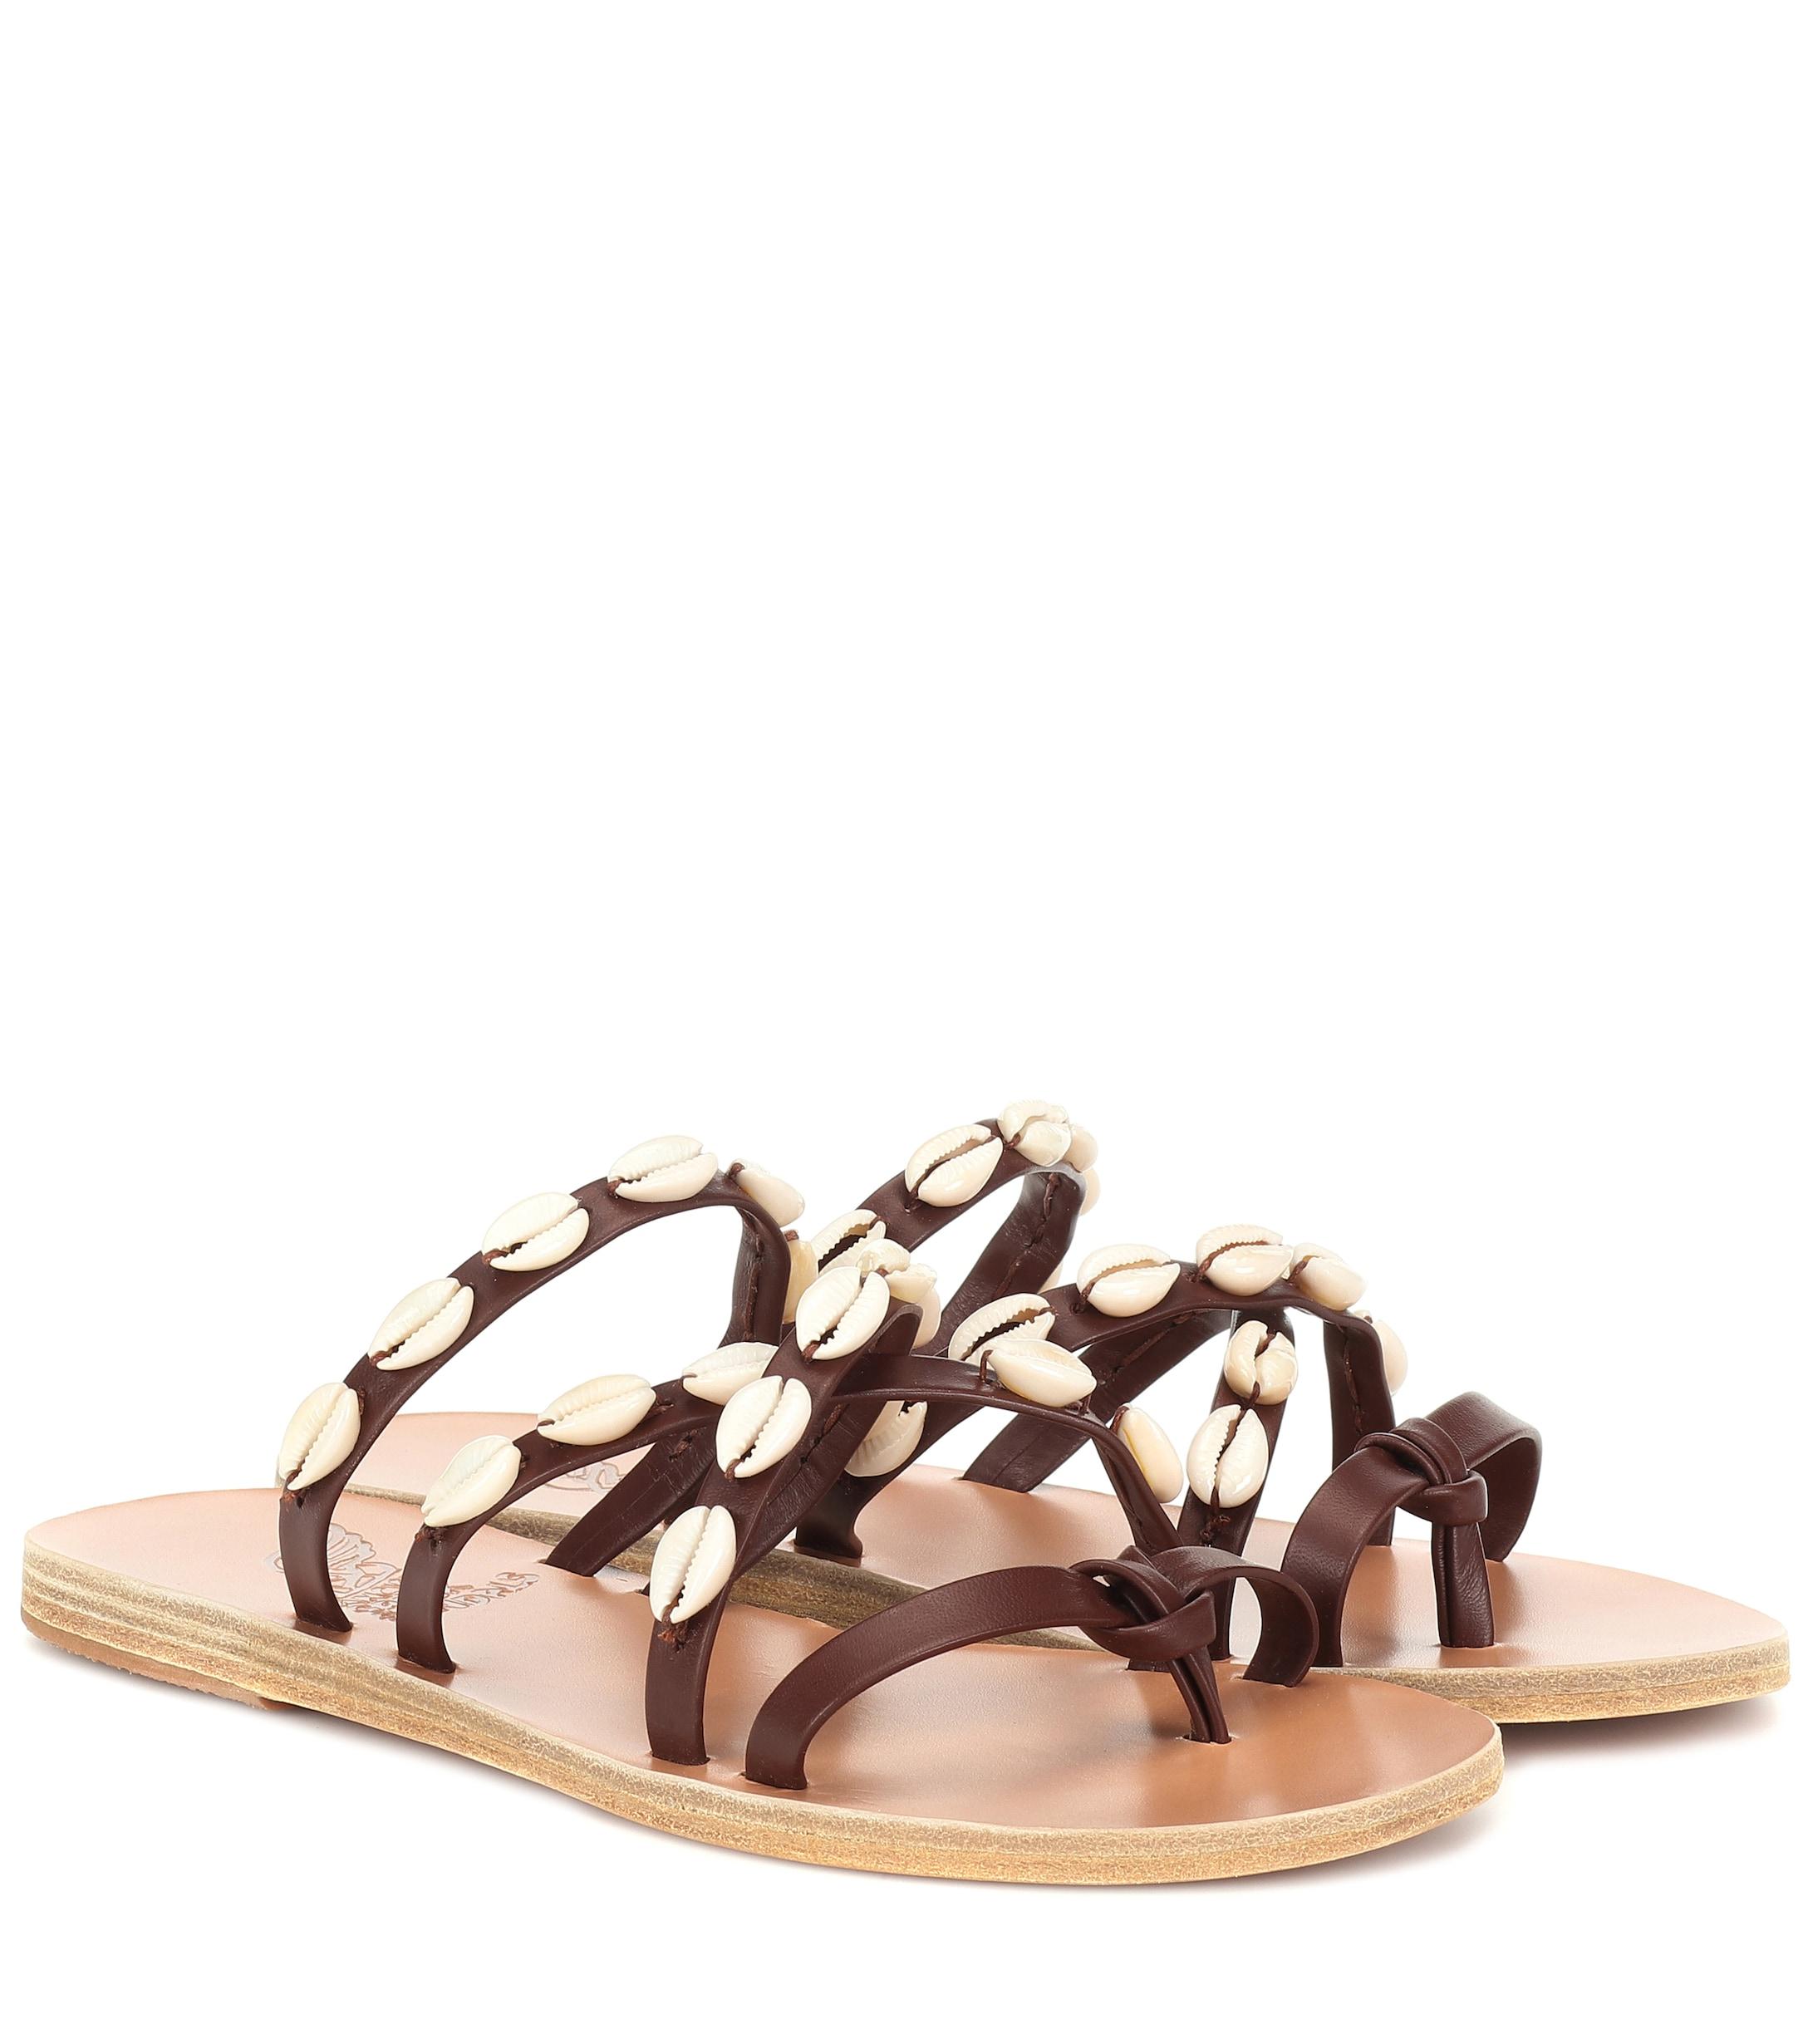 Ancient Greek Sandals Exclusive To Mytheresa – Hydra Leather Sandals in ...